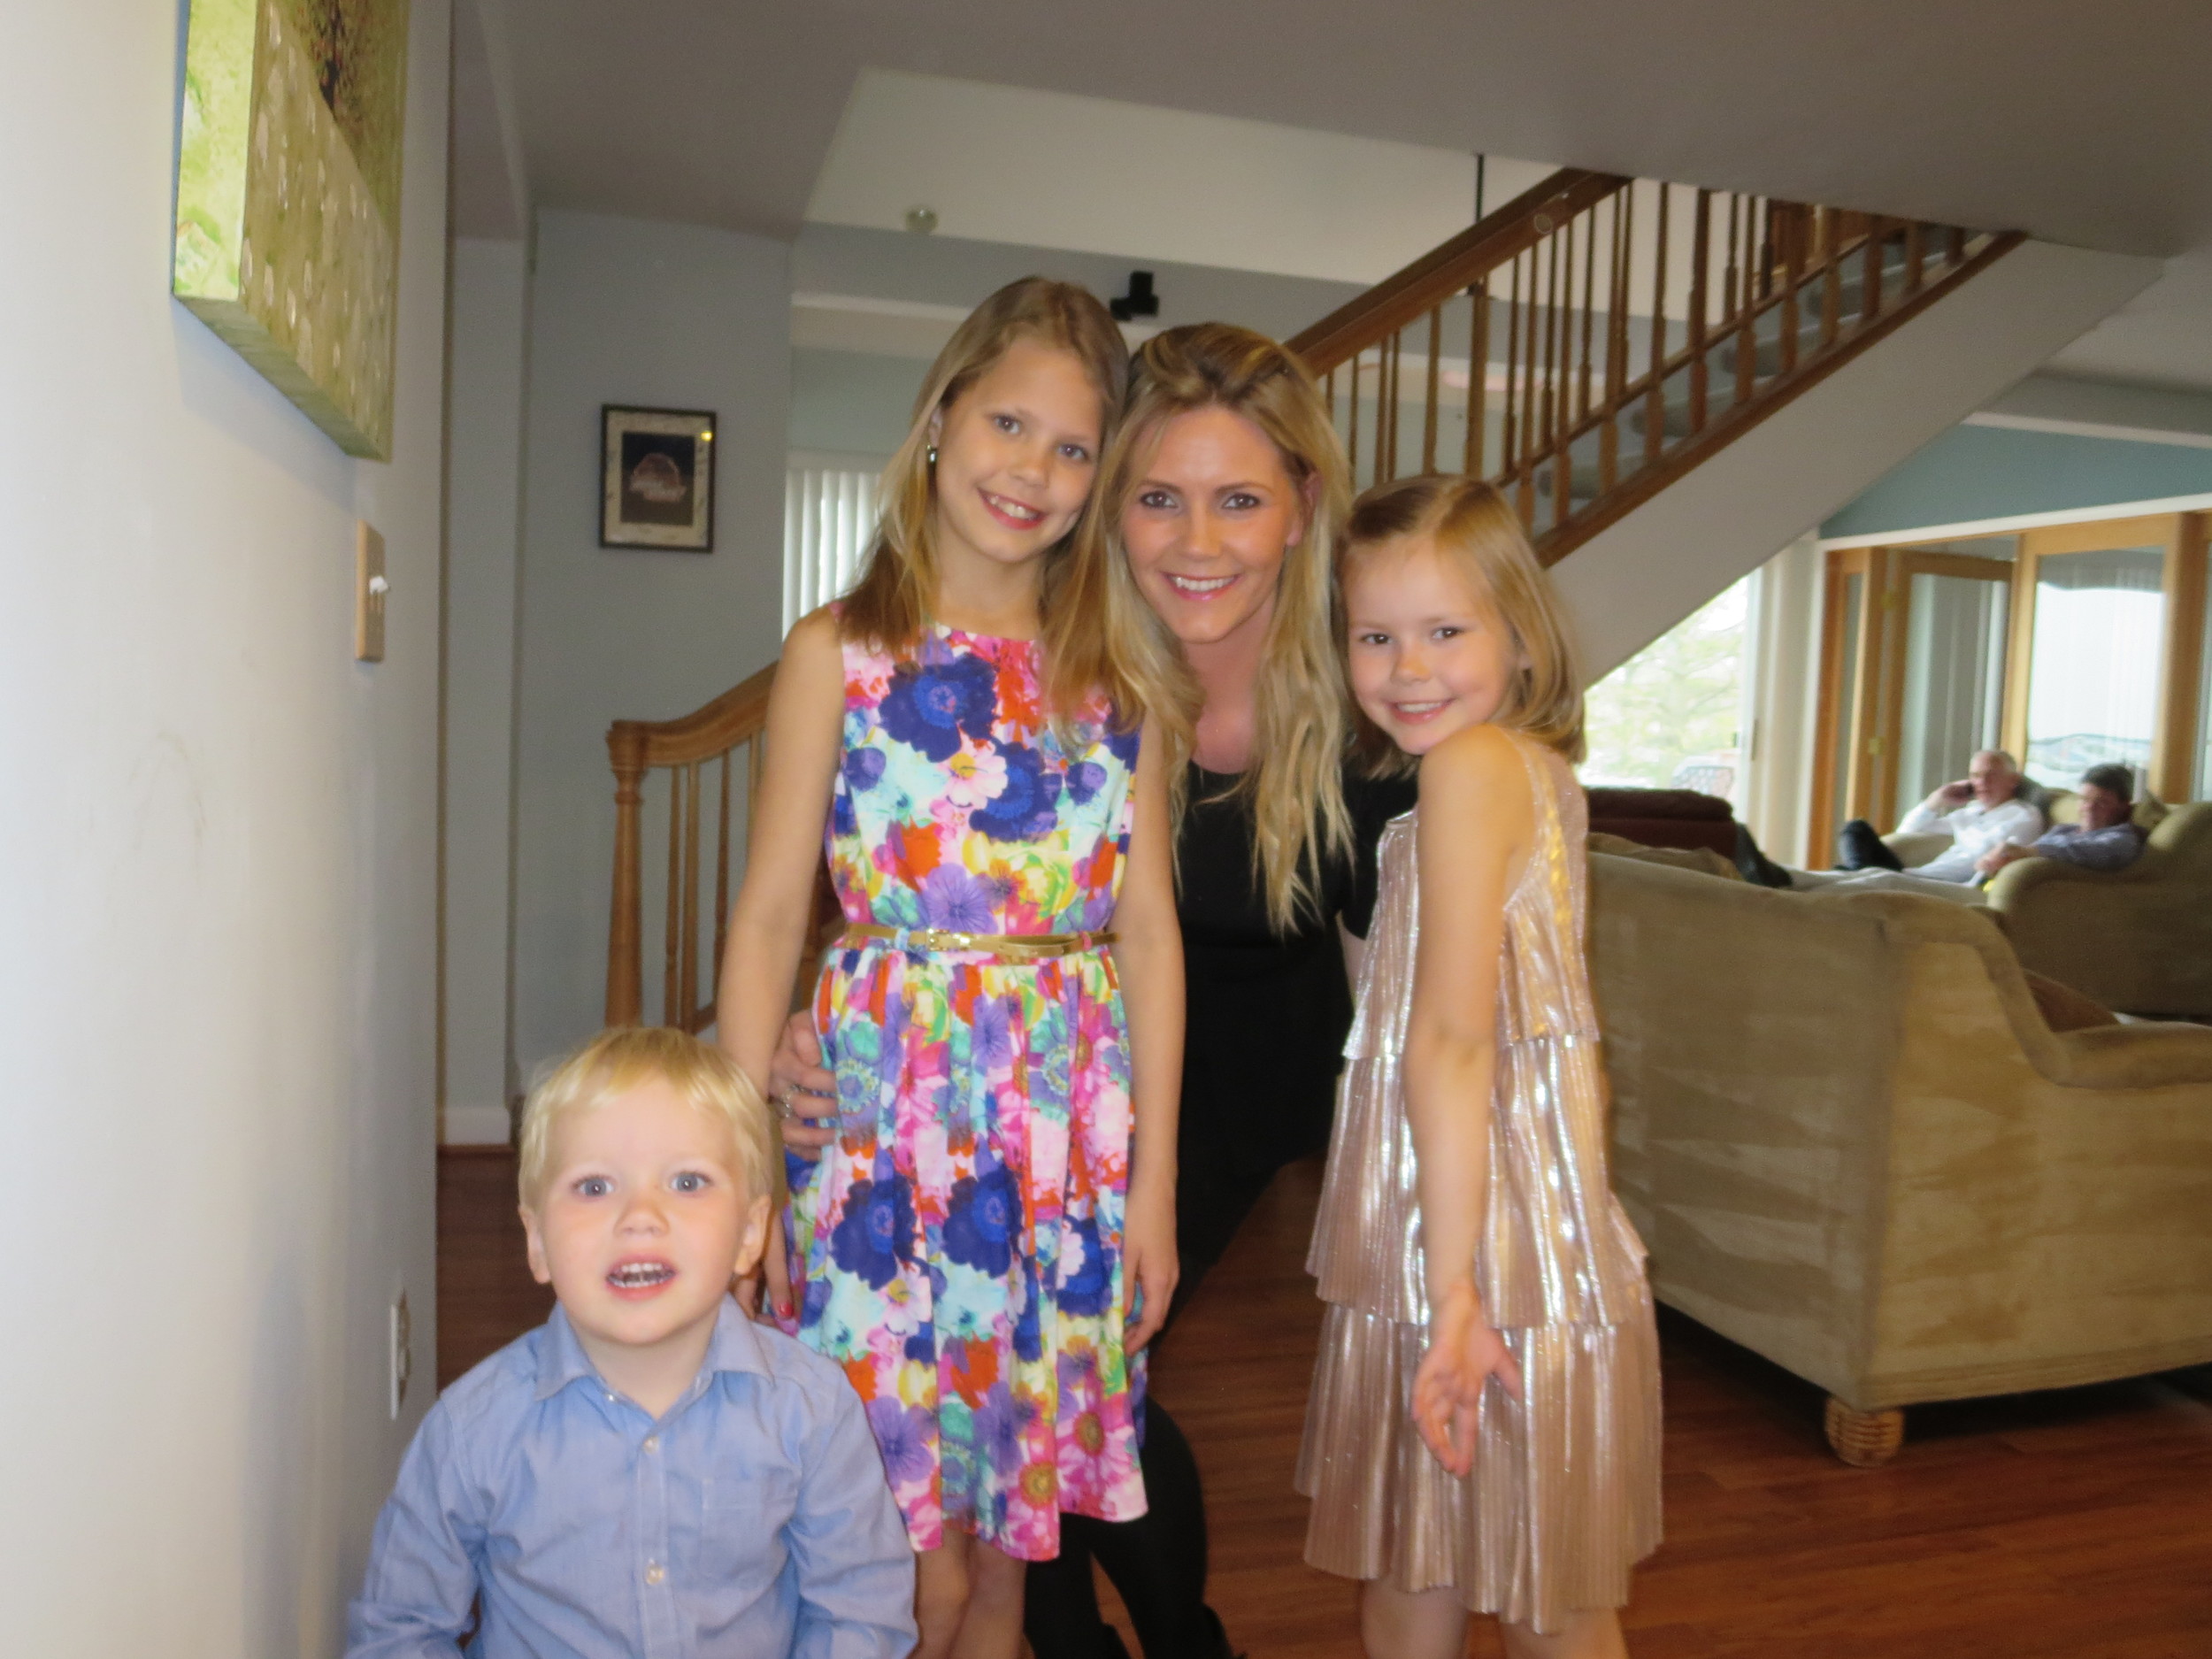 Lilja with her kids - ready to party